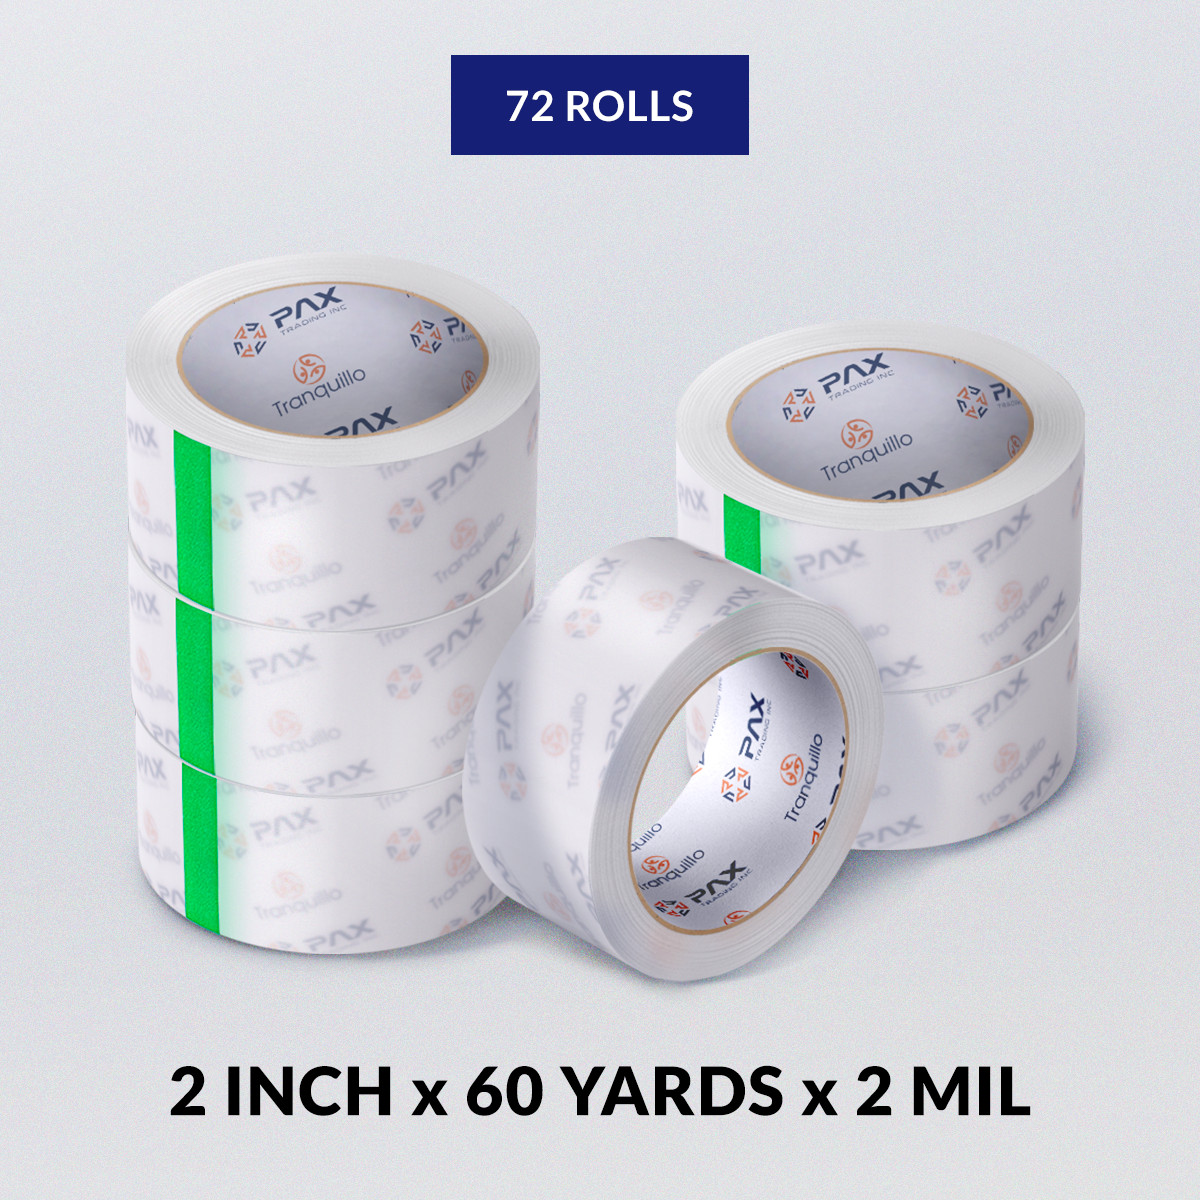 72 Clear Tape Rolls 2 x 60 Yards x 2mil wholesale price